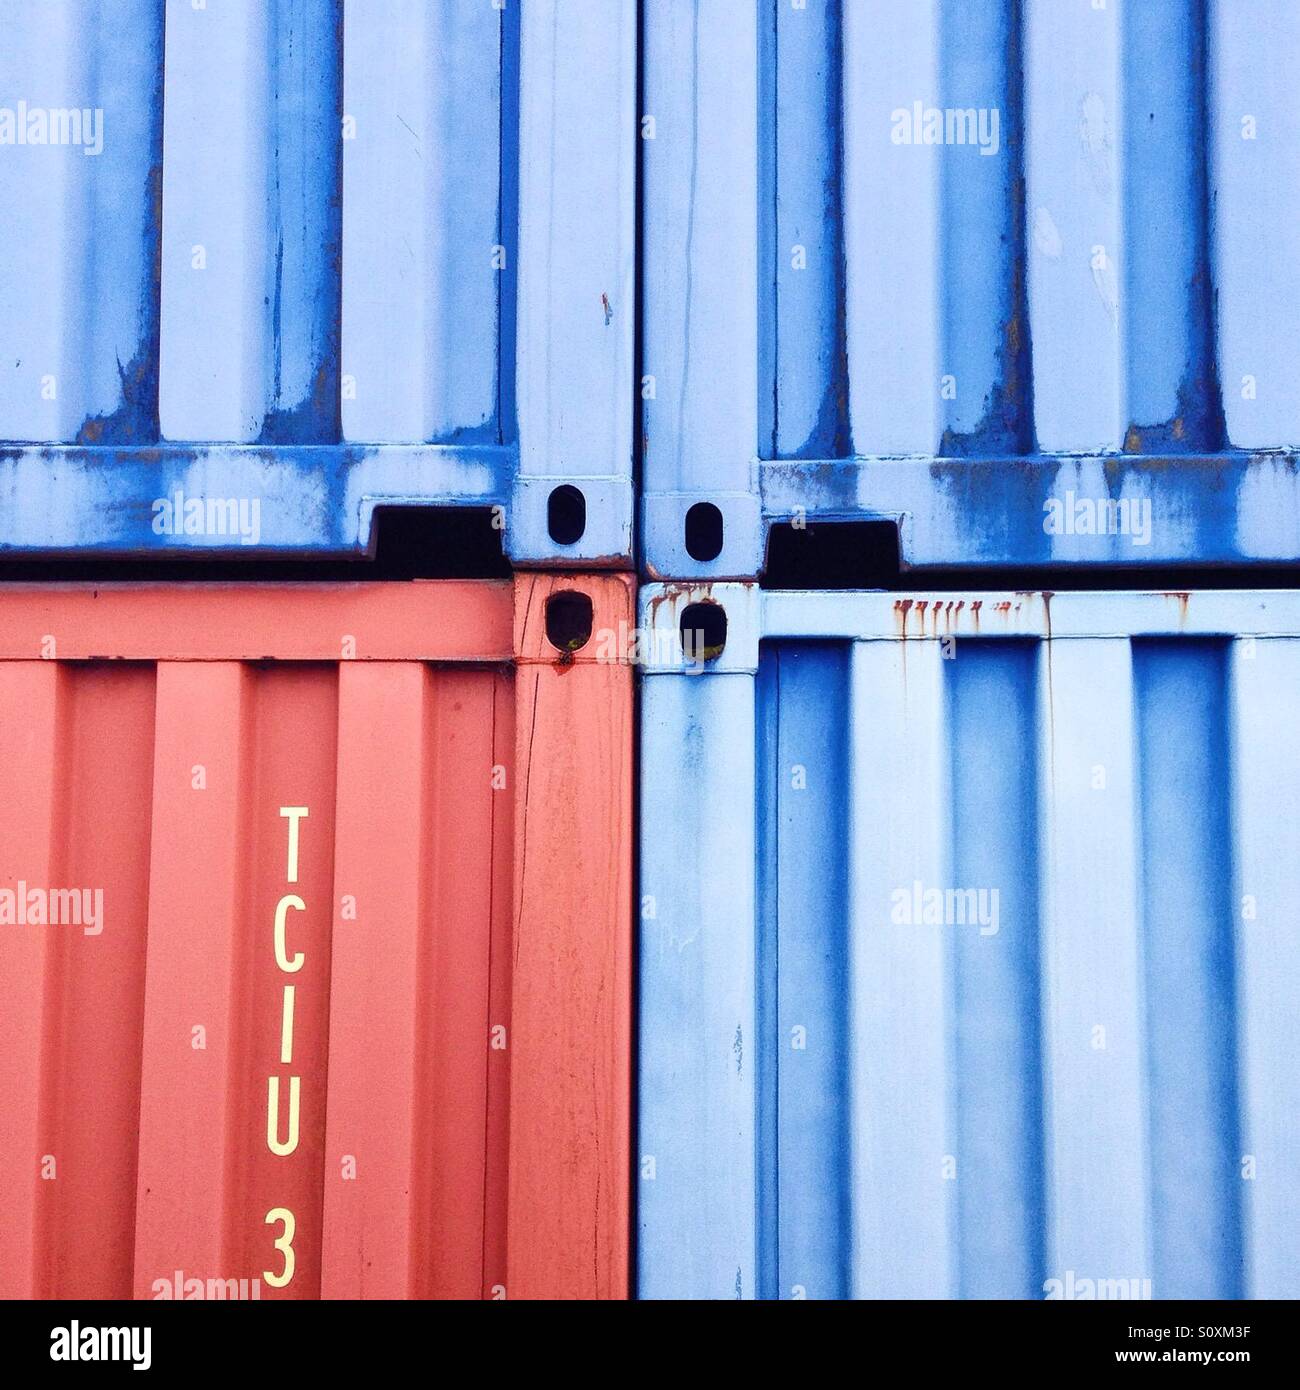 Shipping containers Stock Photo